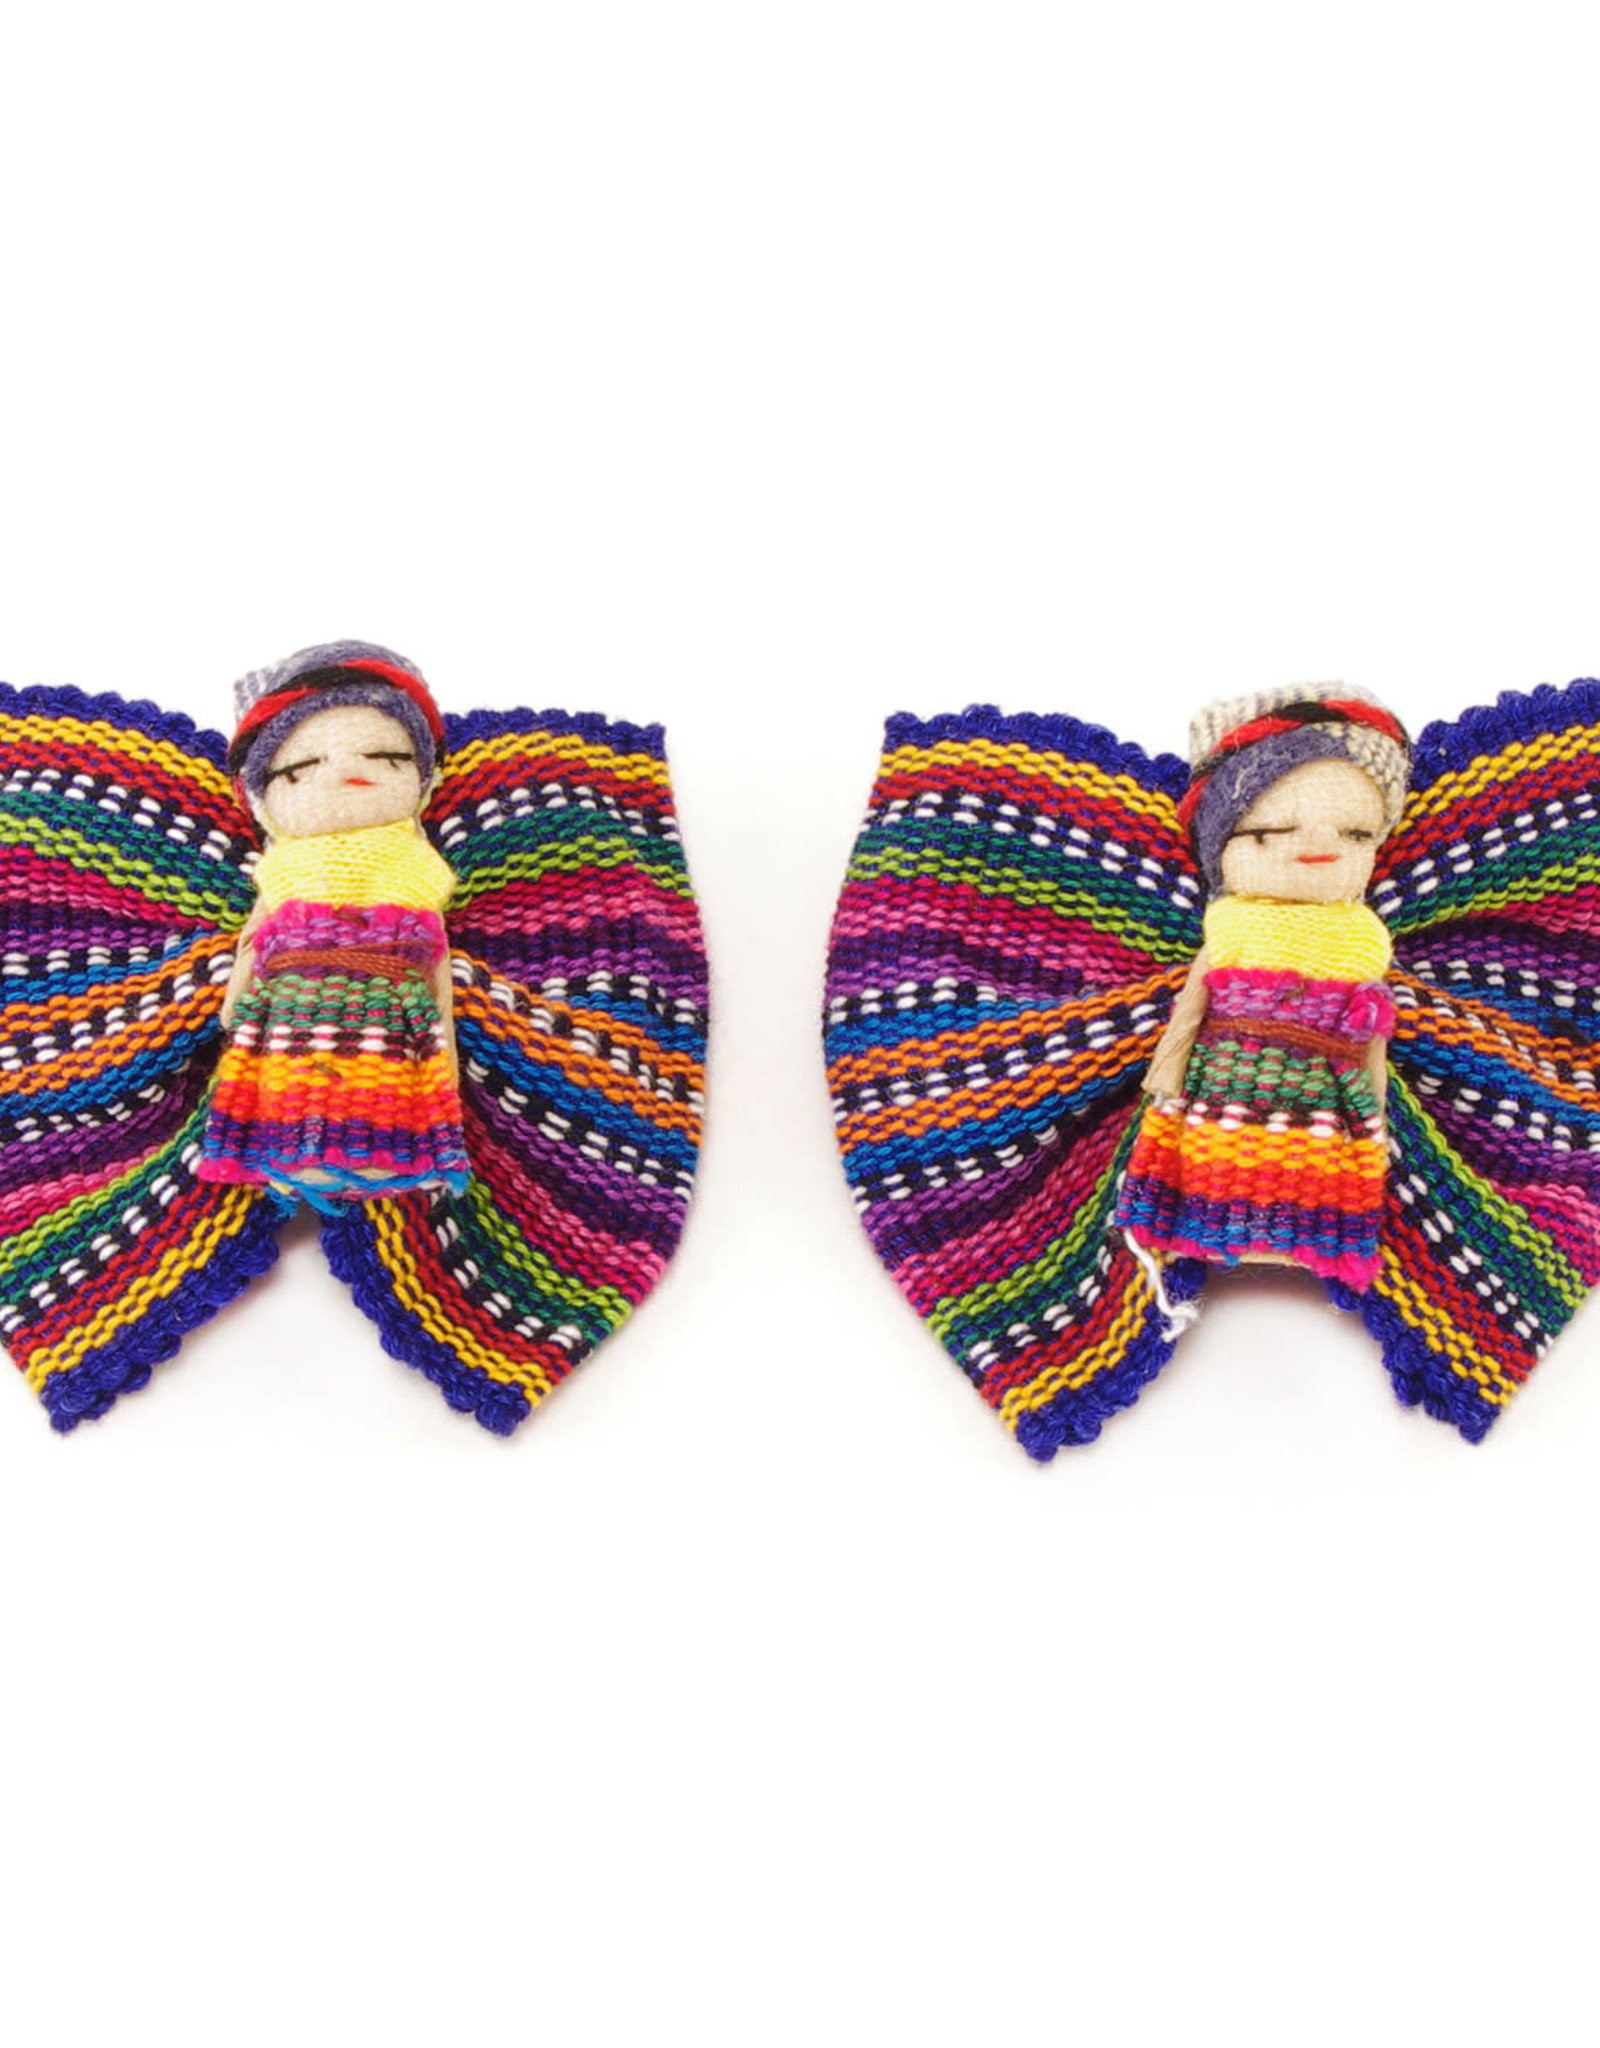 Lucia's Imports Worry Doll Barrette Set